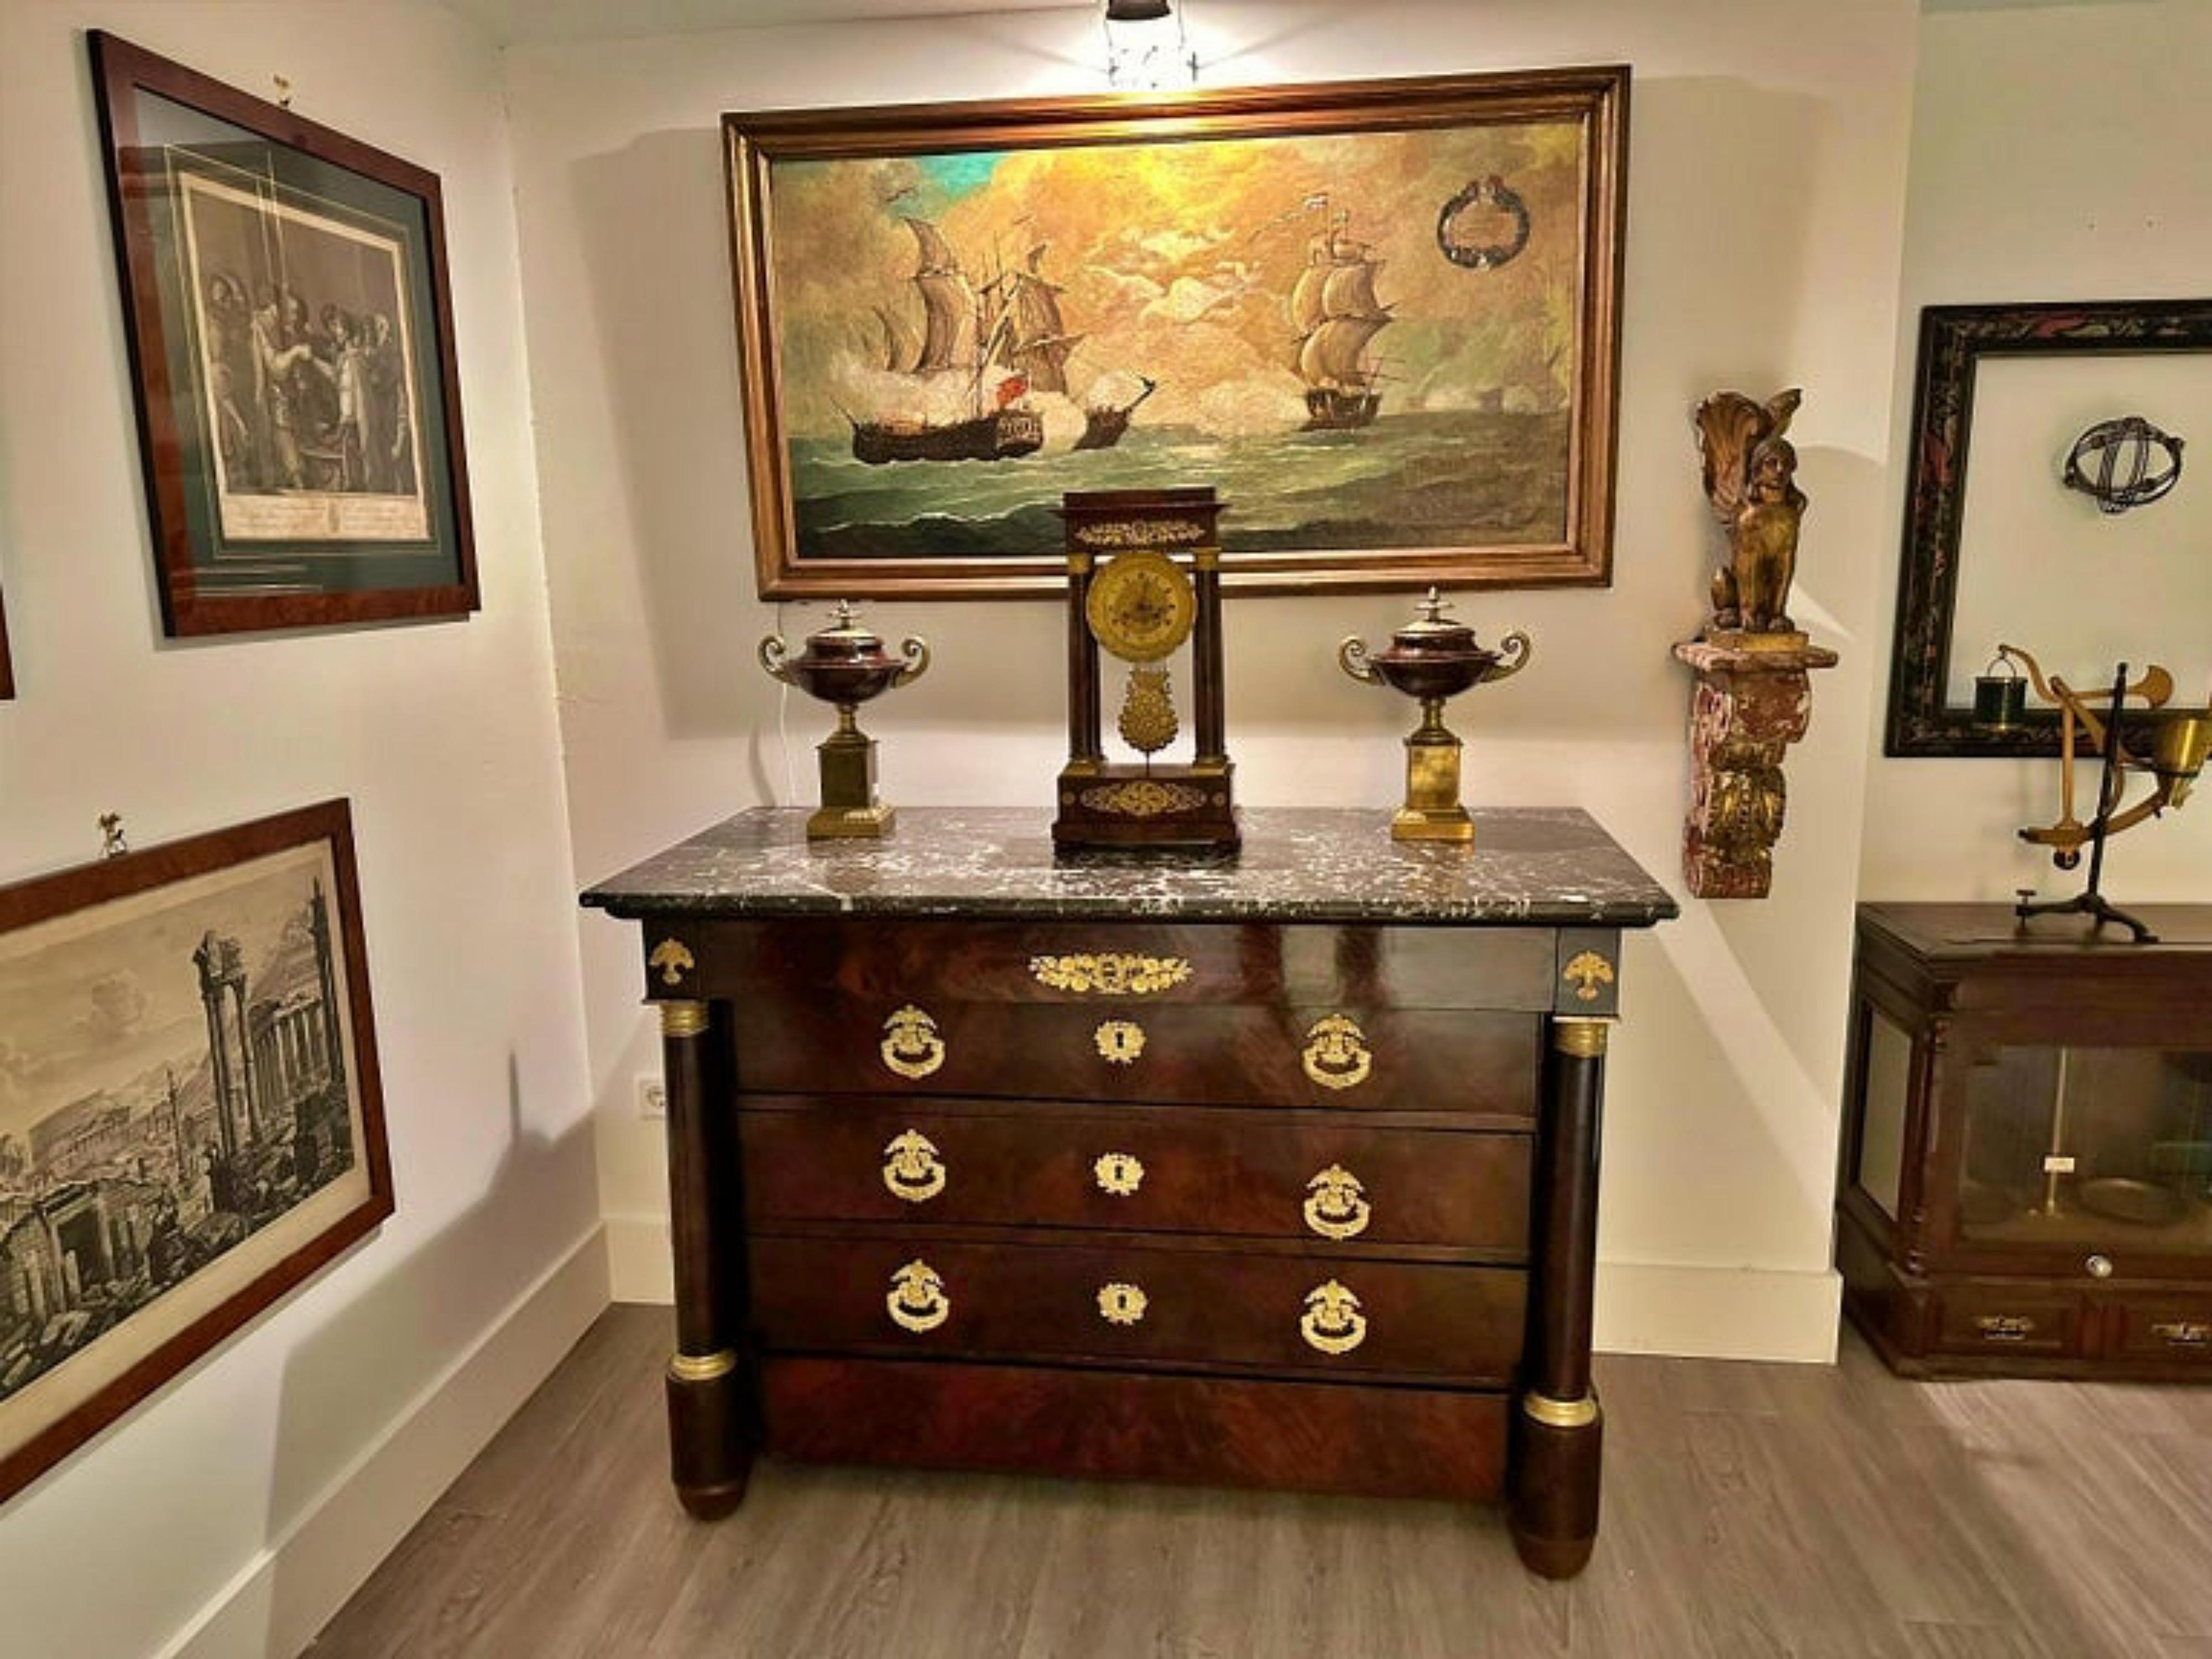 Empire chest of drawers in mahogany veneer, 19th century

Three drawers plus one under the gray marble top, columns on the uprights with gilt bronze capitals,

cm 129x61,5x89

condiciones originales, restored